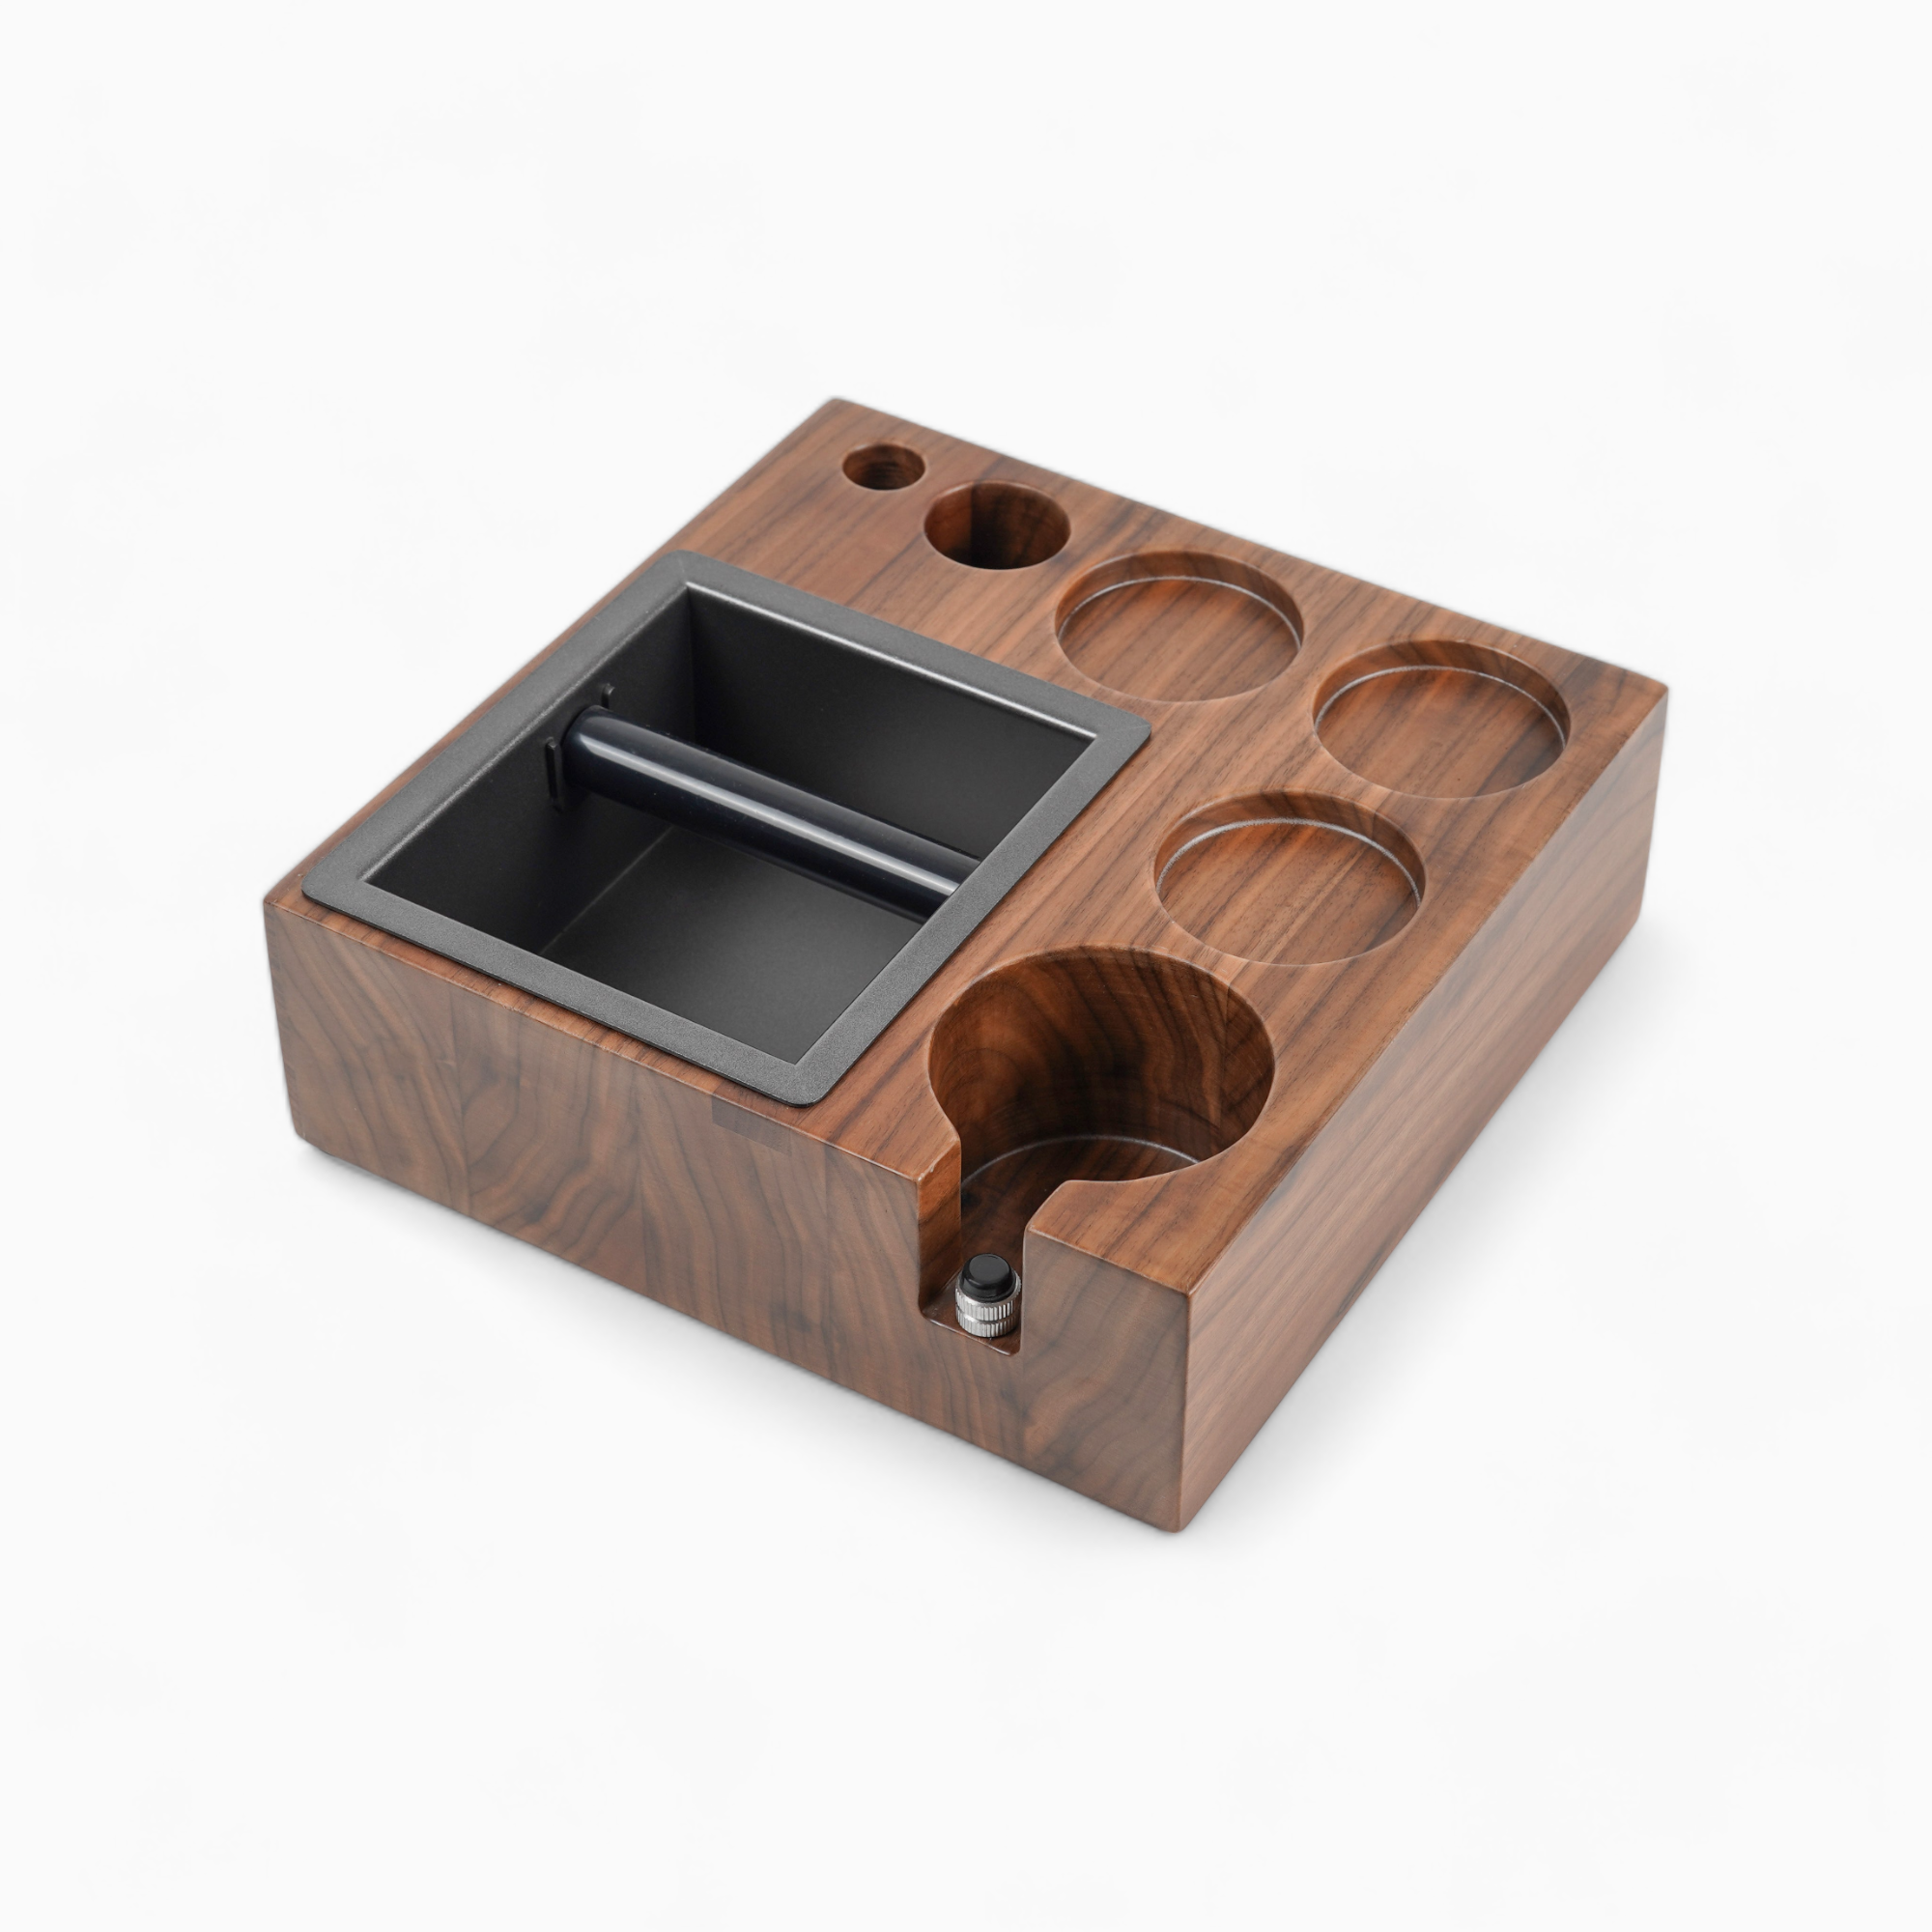 Barista Coffee Tamping Station with Knock Box